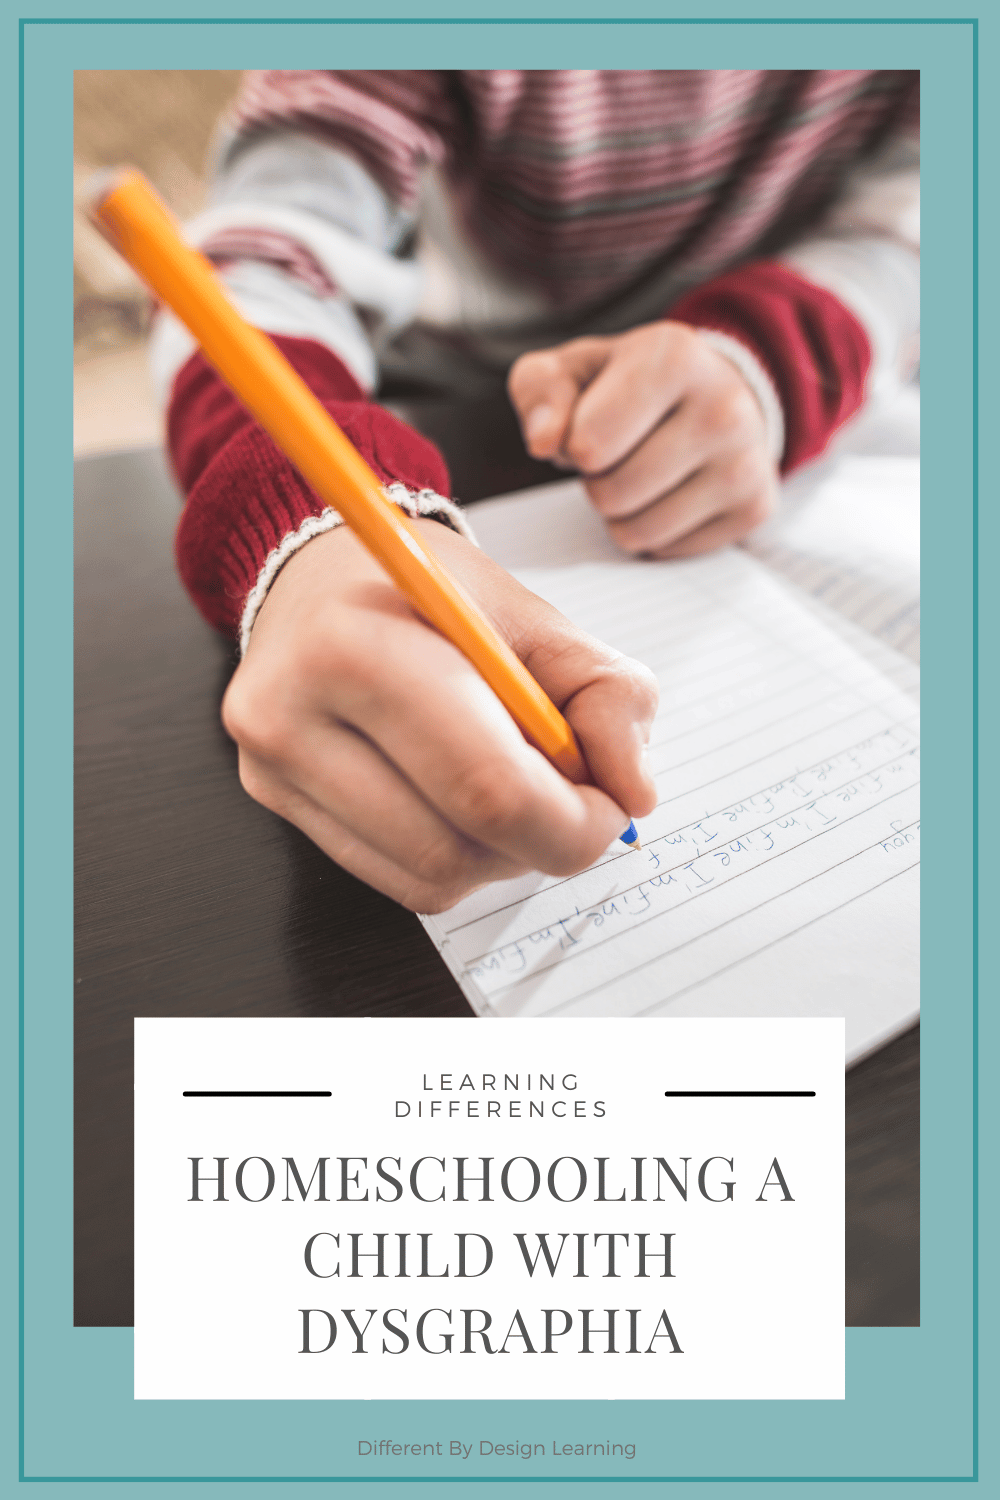 Homeschooling A Child With Dysgraphia - Different By Design Learning